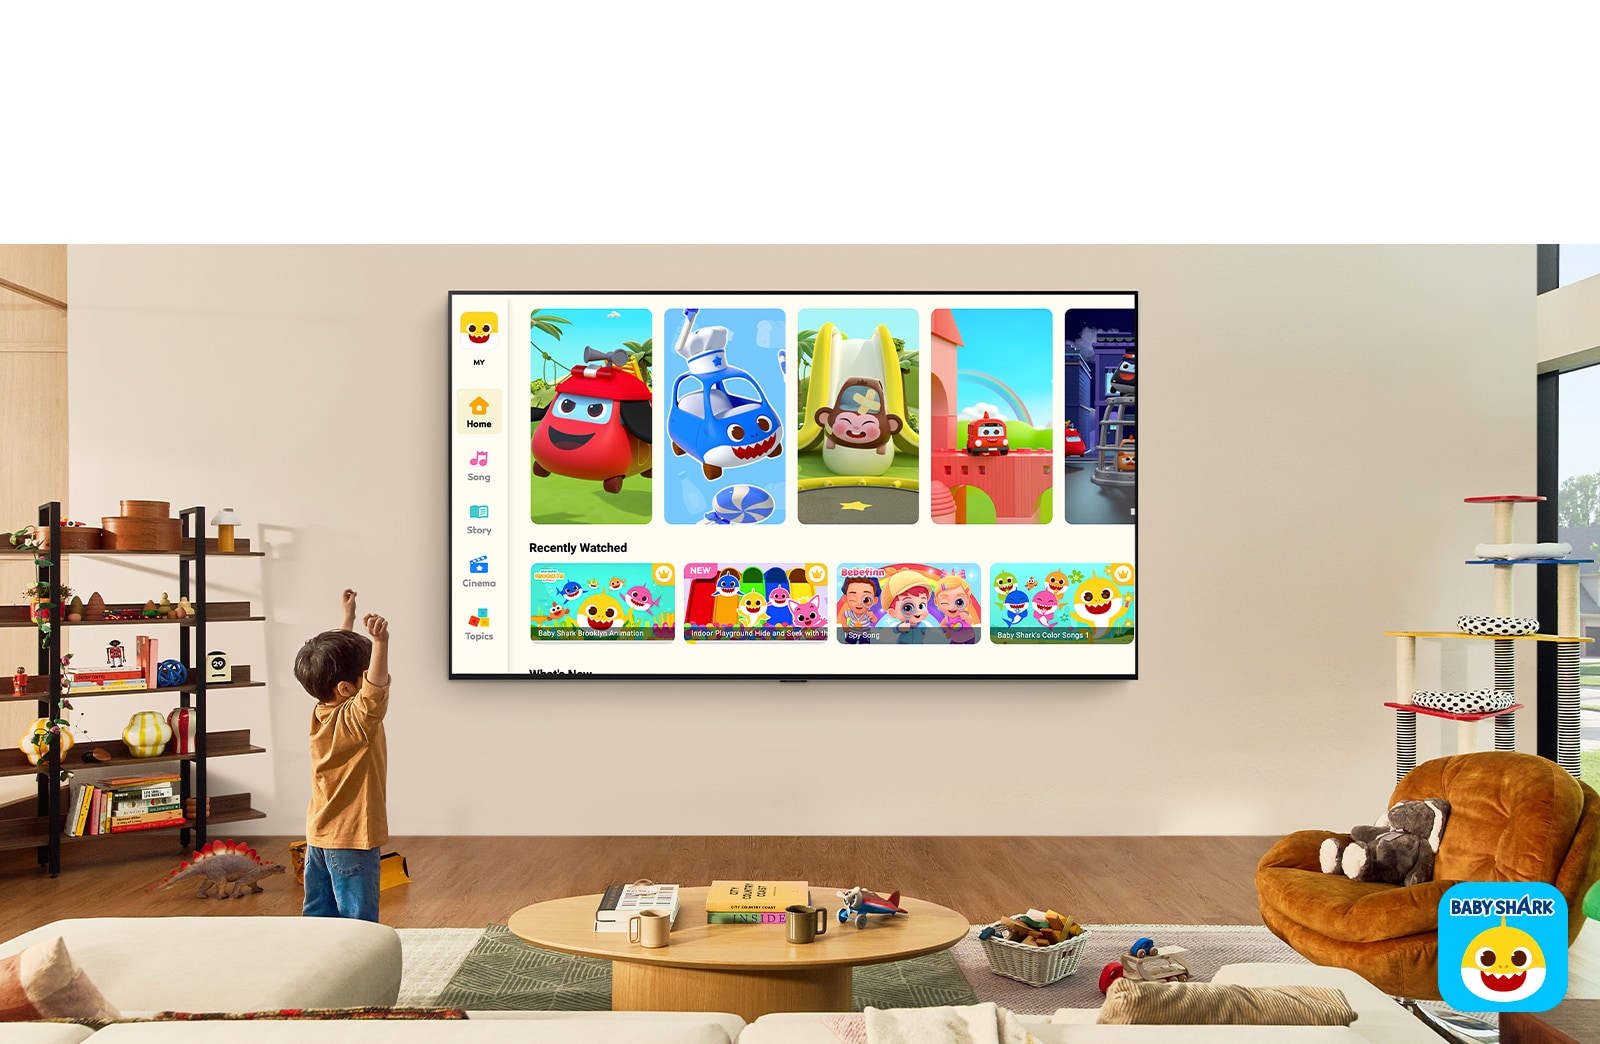 A little boy watches Pinkfong on a wall-mounted LG TV in a living space with kids' toys.